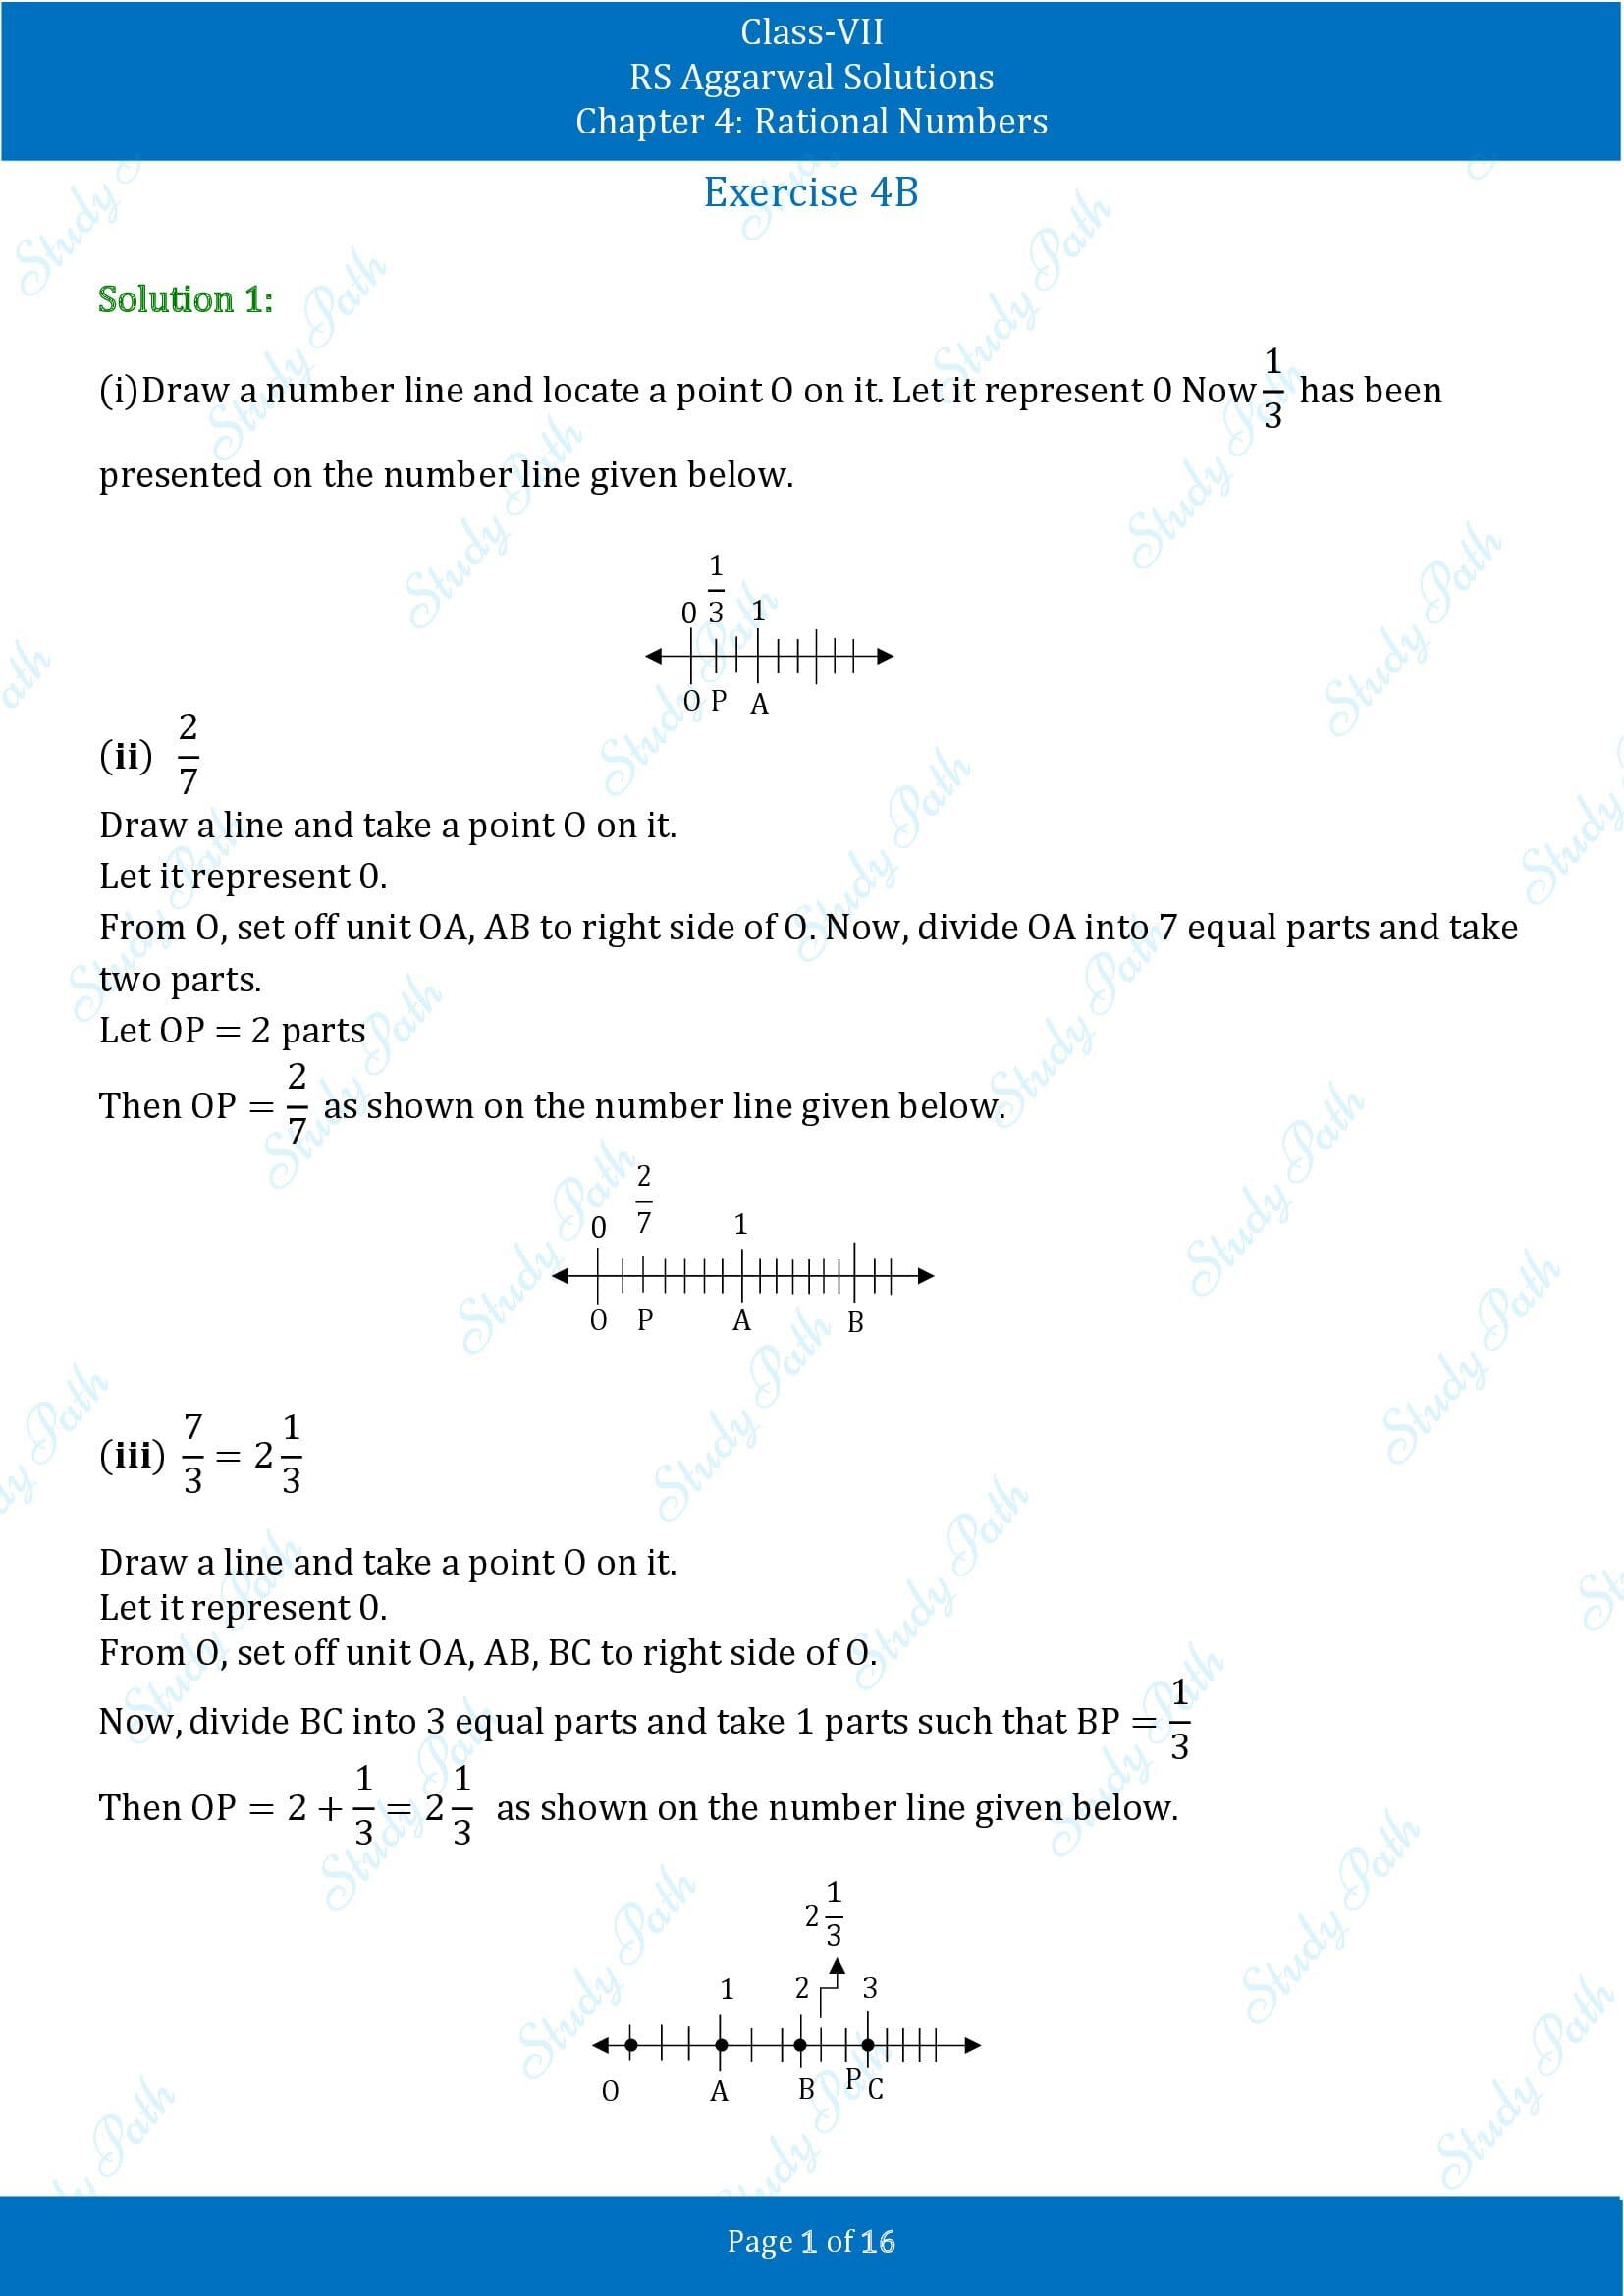 RS Aggarwal Solutions Class 7 Chapter 4 Rational Numbers Exercise 4B 00001